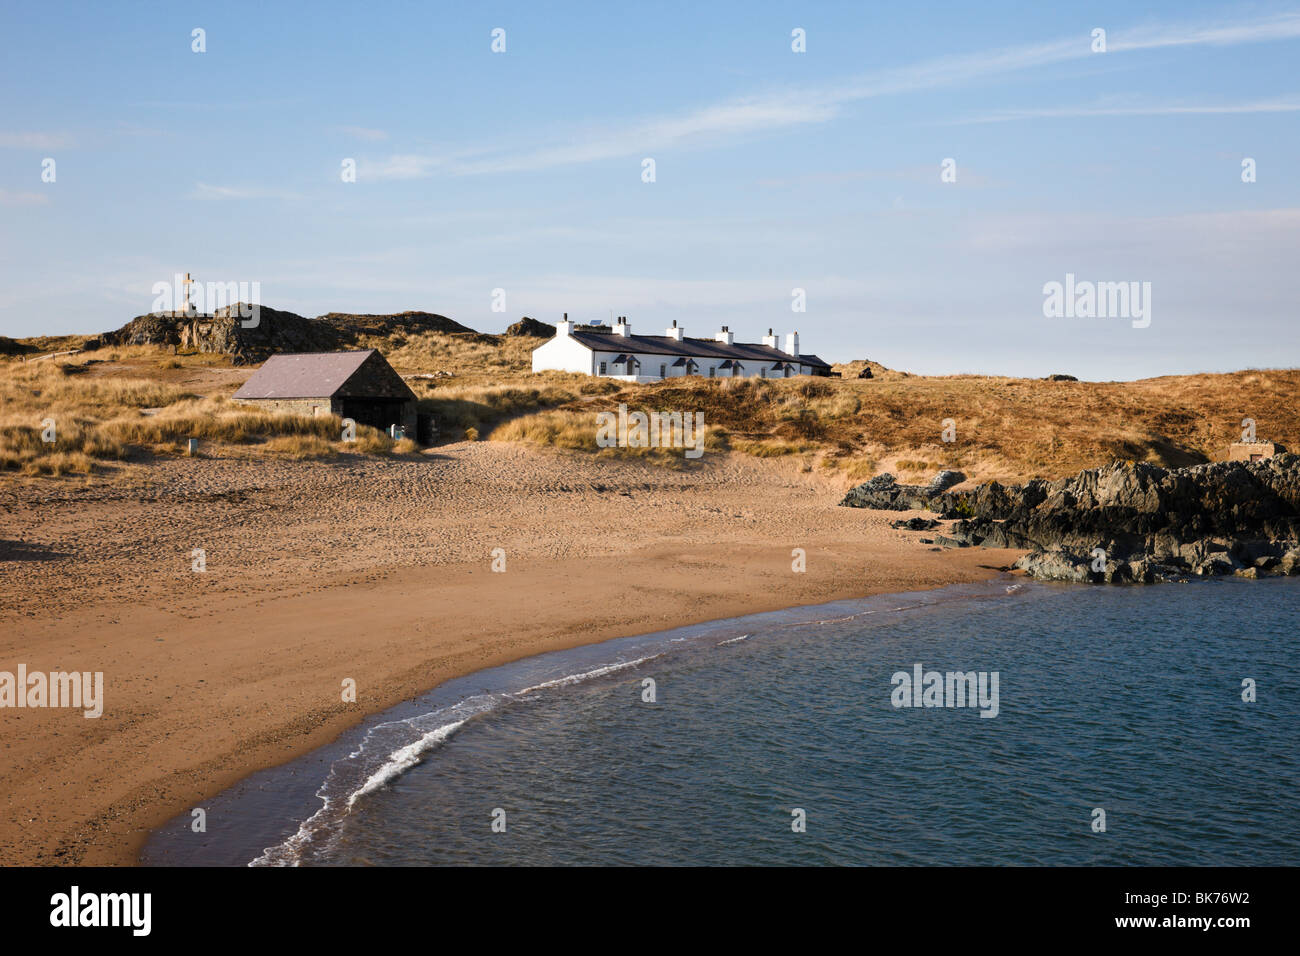 View across sandy beach to Pilot's cottages on Llanddwyn Island. Pilots Bay, Newborough, Isle of Anglesey, North Wales, UK, Britain. Stock Photo